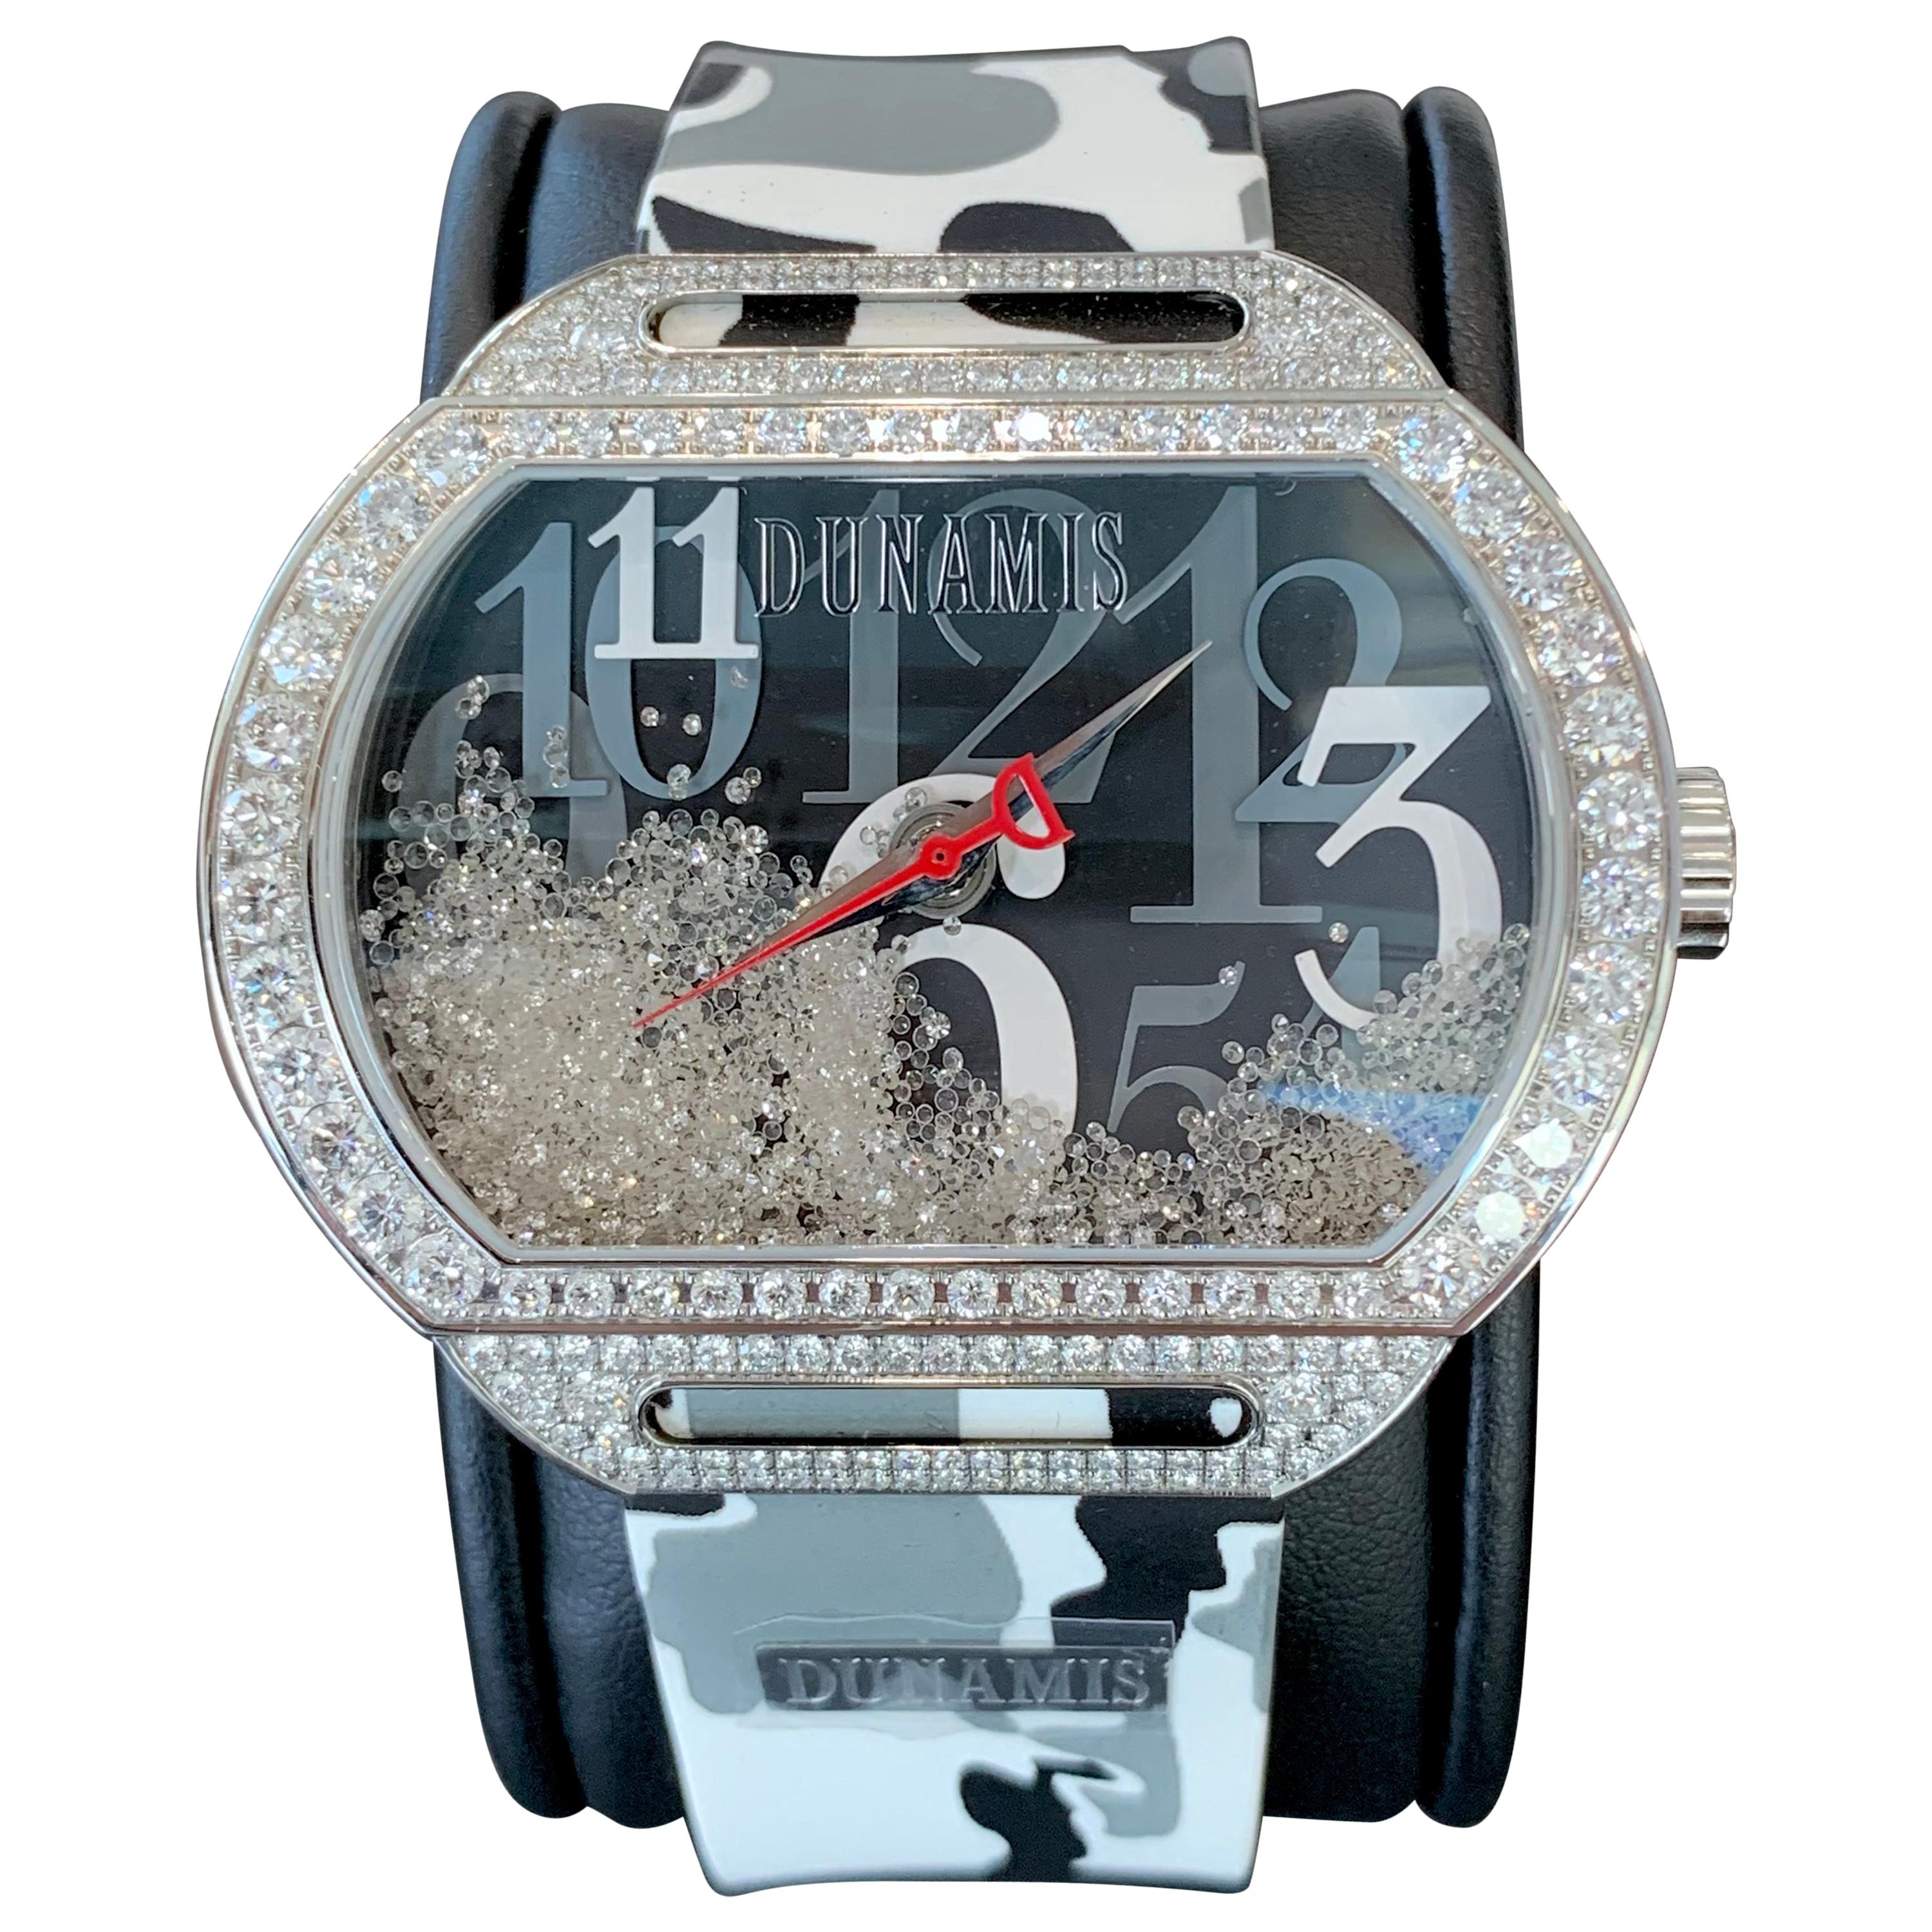 Fully Loaded White Diamond Timepiece Watch, The Dunamis Spartan For Sale